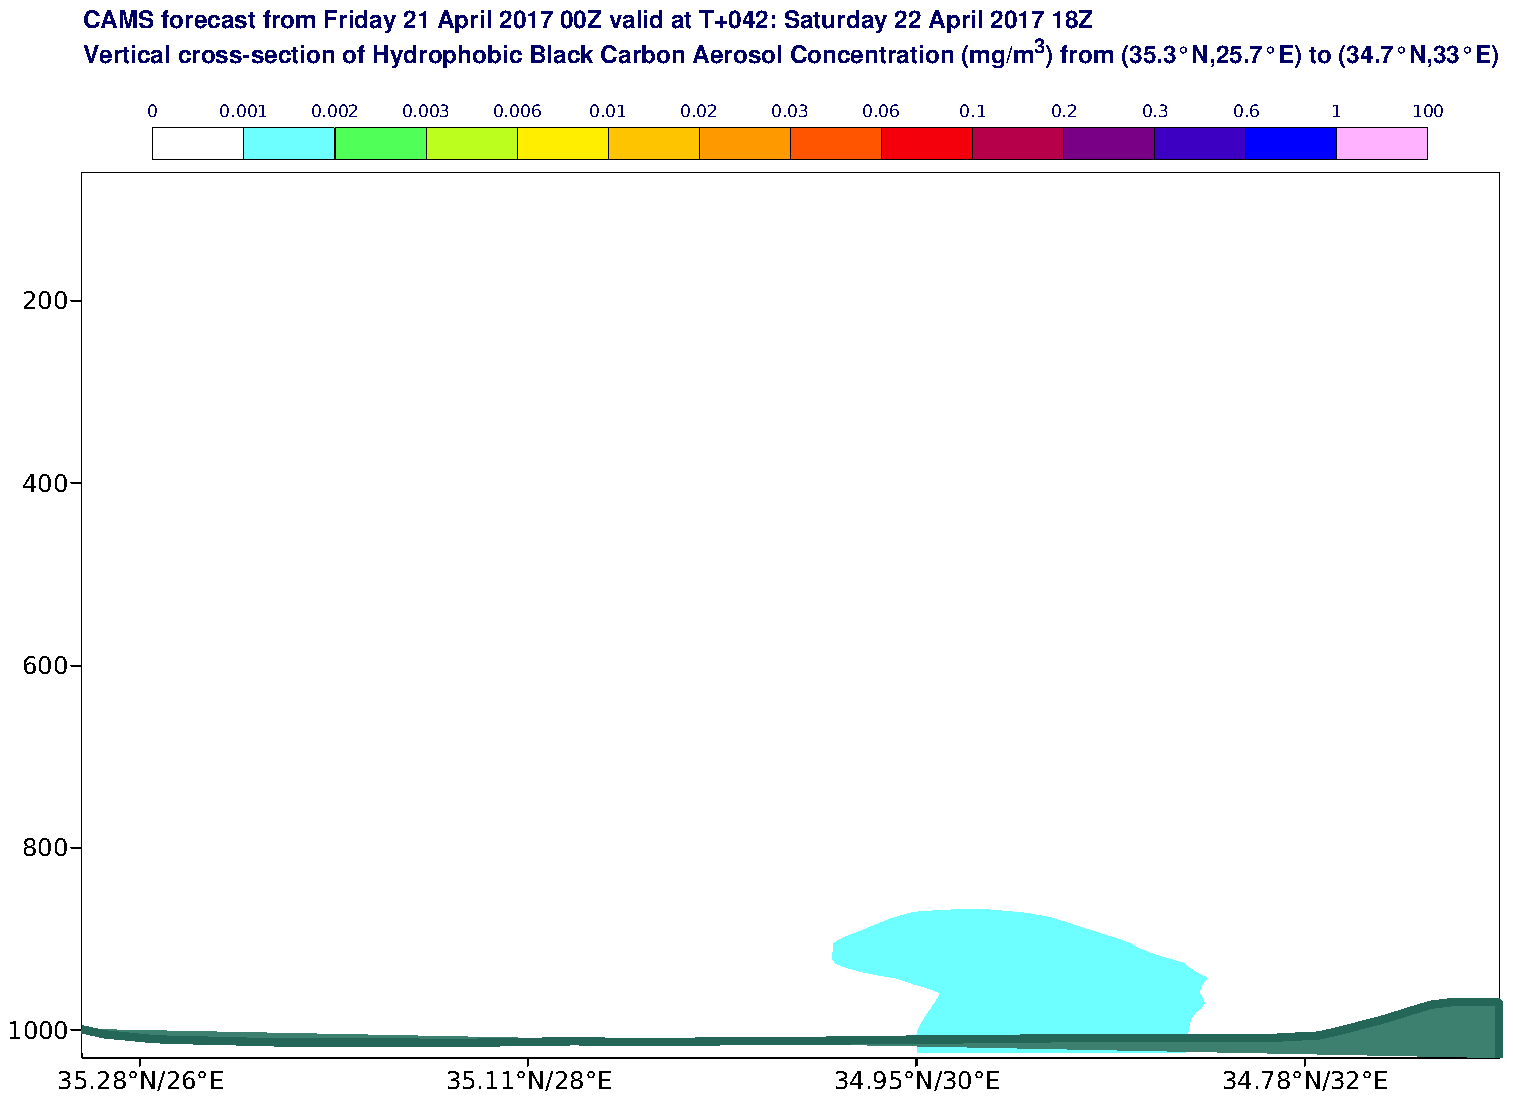 Vertical cross-section of Hydrophobic Black Carbon Aerosol Concentration (mg/m3) valid at T42 - 2017-04-22 18:00